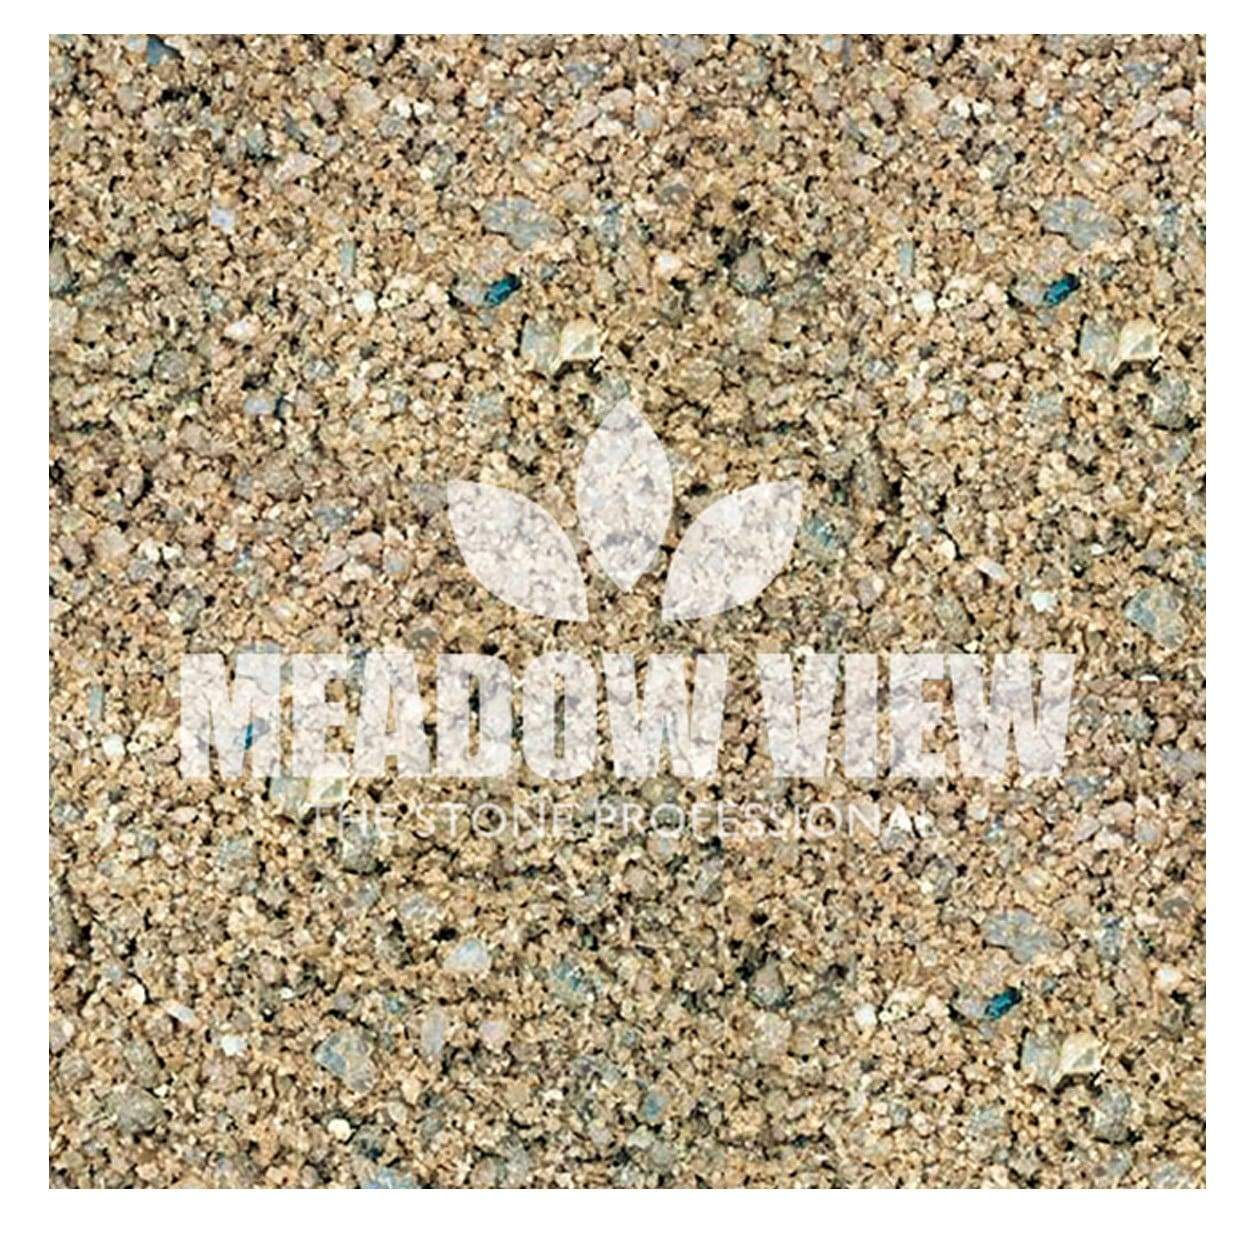 Meadow View Landscaping Horticultural Sand c.0-4mm